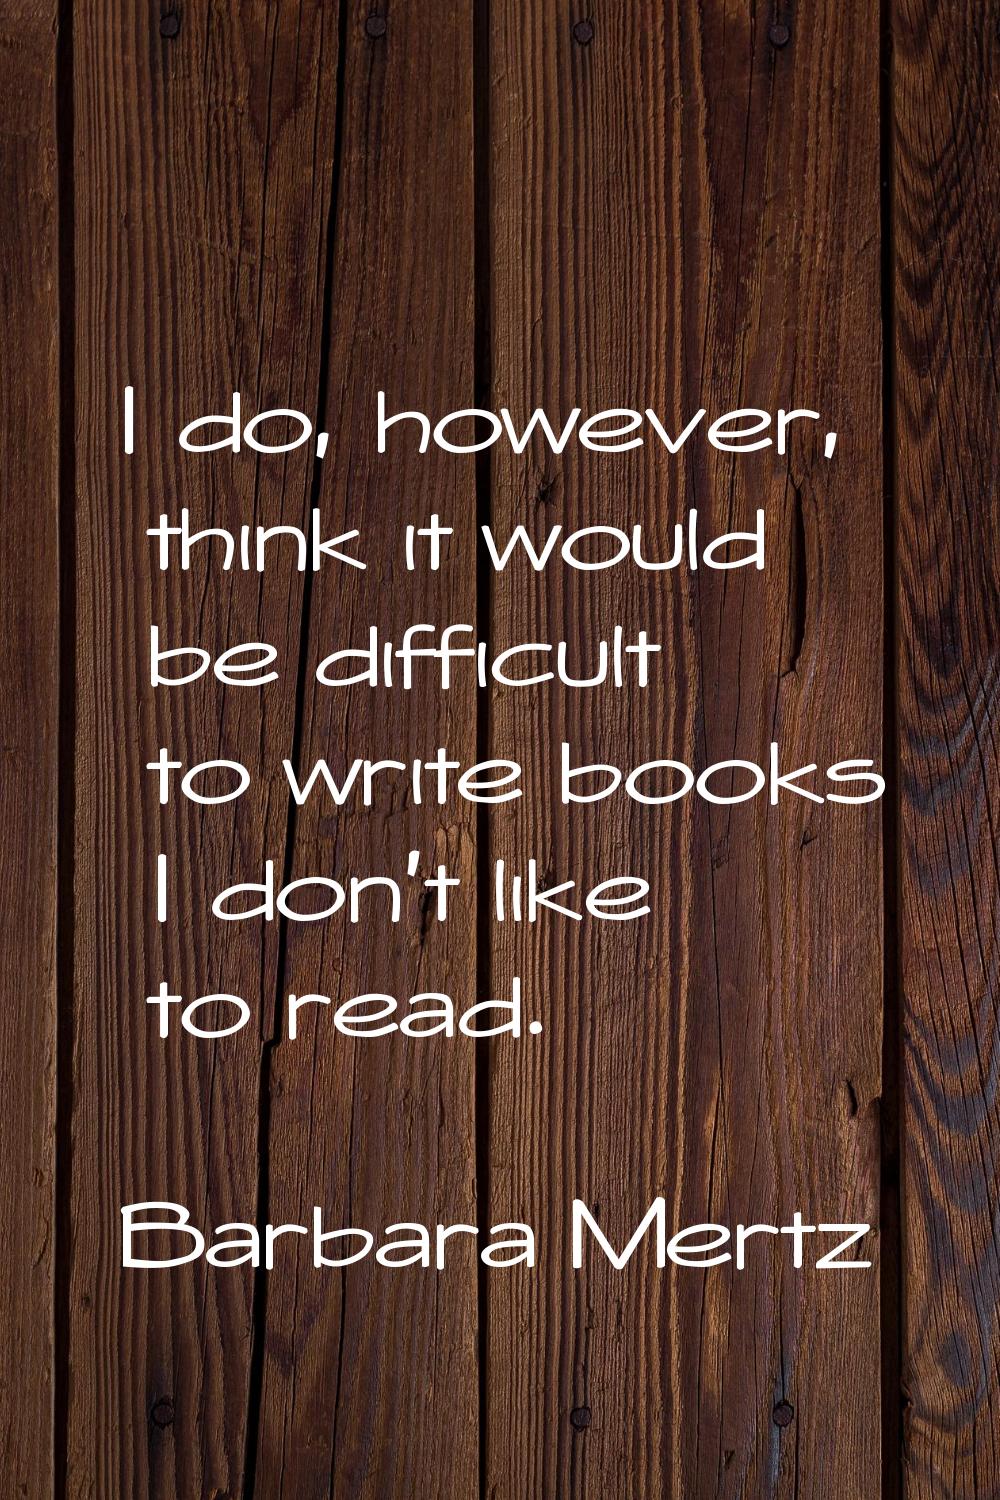 I do, however, think it would be difficult to write books I don't like to read.